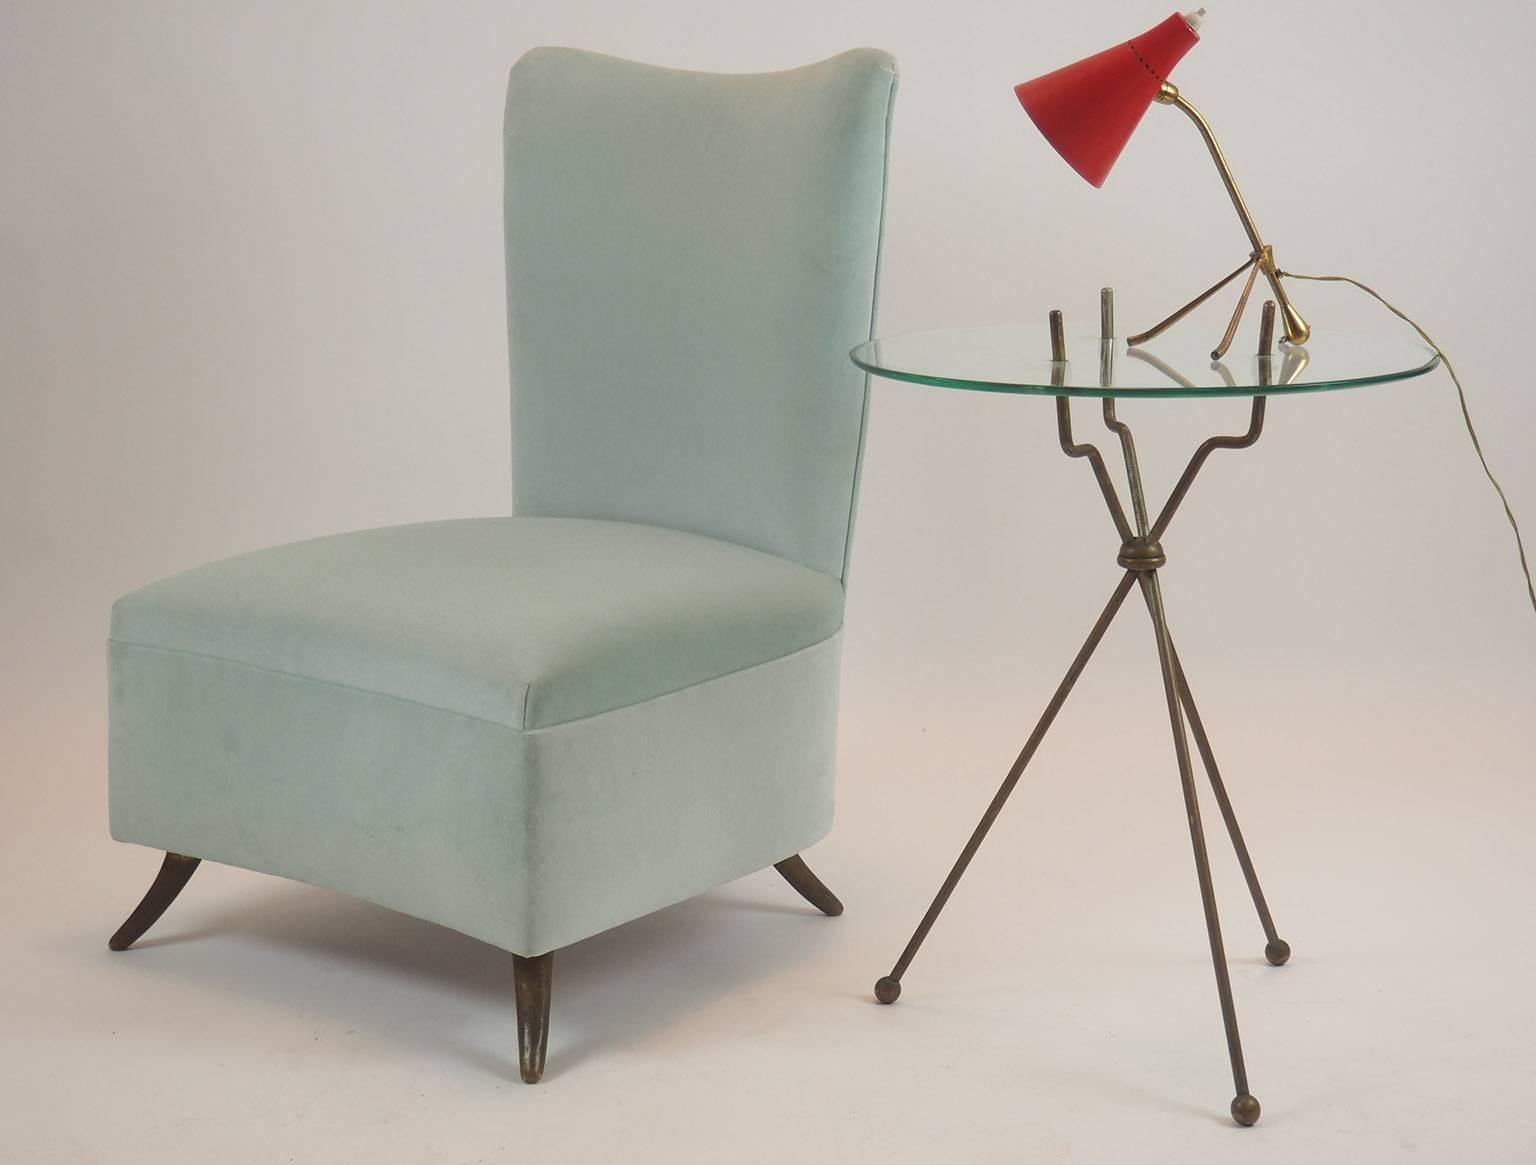 Italian Gio Ponti Attributed Slipping Chair Manufactured by ISA Bergamo, Italy, 1950s